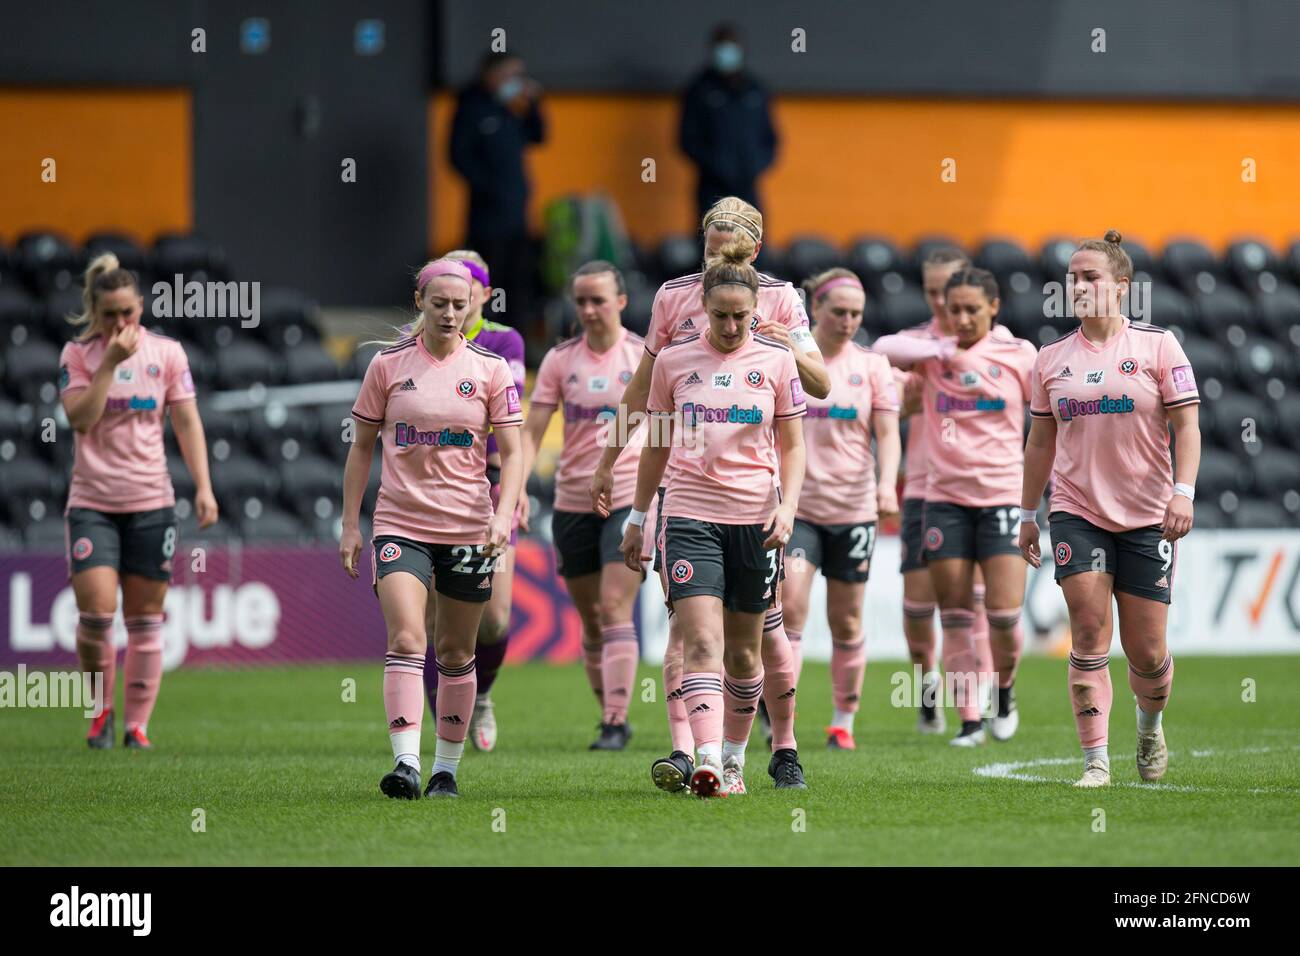 London, UK. 16th May, 2021. London, UK. May 2nd : Sheffield squad walks during the 2020-21 FA Women's Cup fixture between Tottenham Hotspur and Sheffield United at The Hive. Credit: Federico Guerra Morán/Alamy Live News Stock Photo